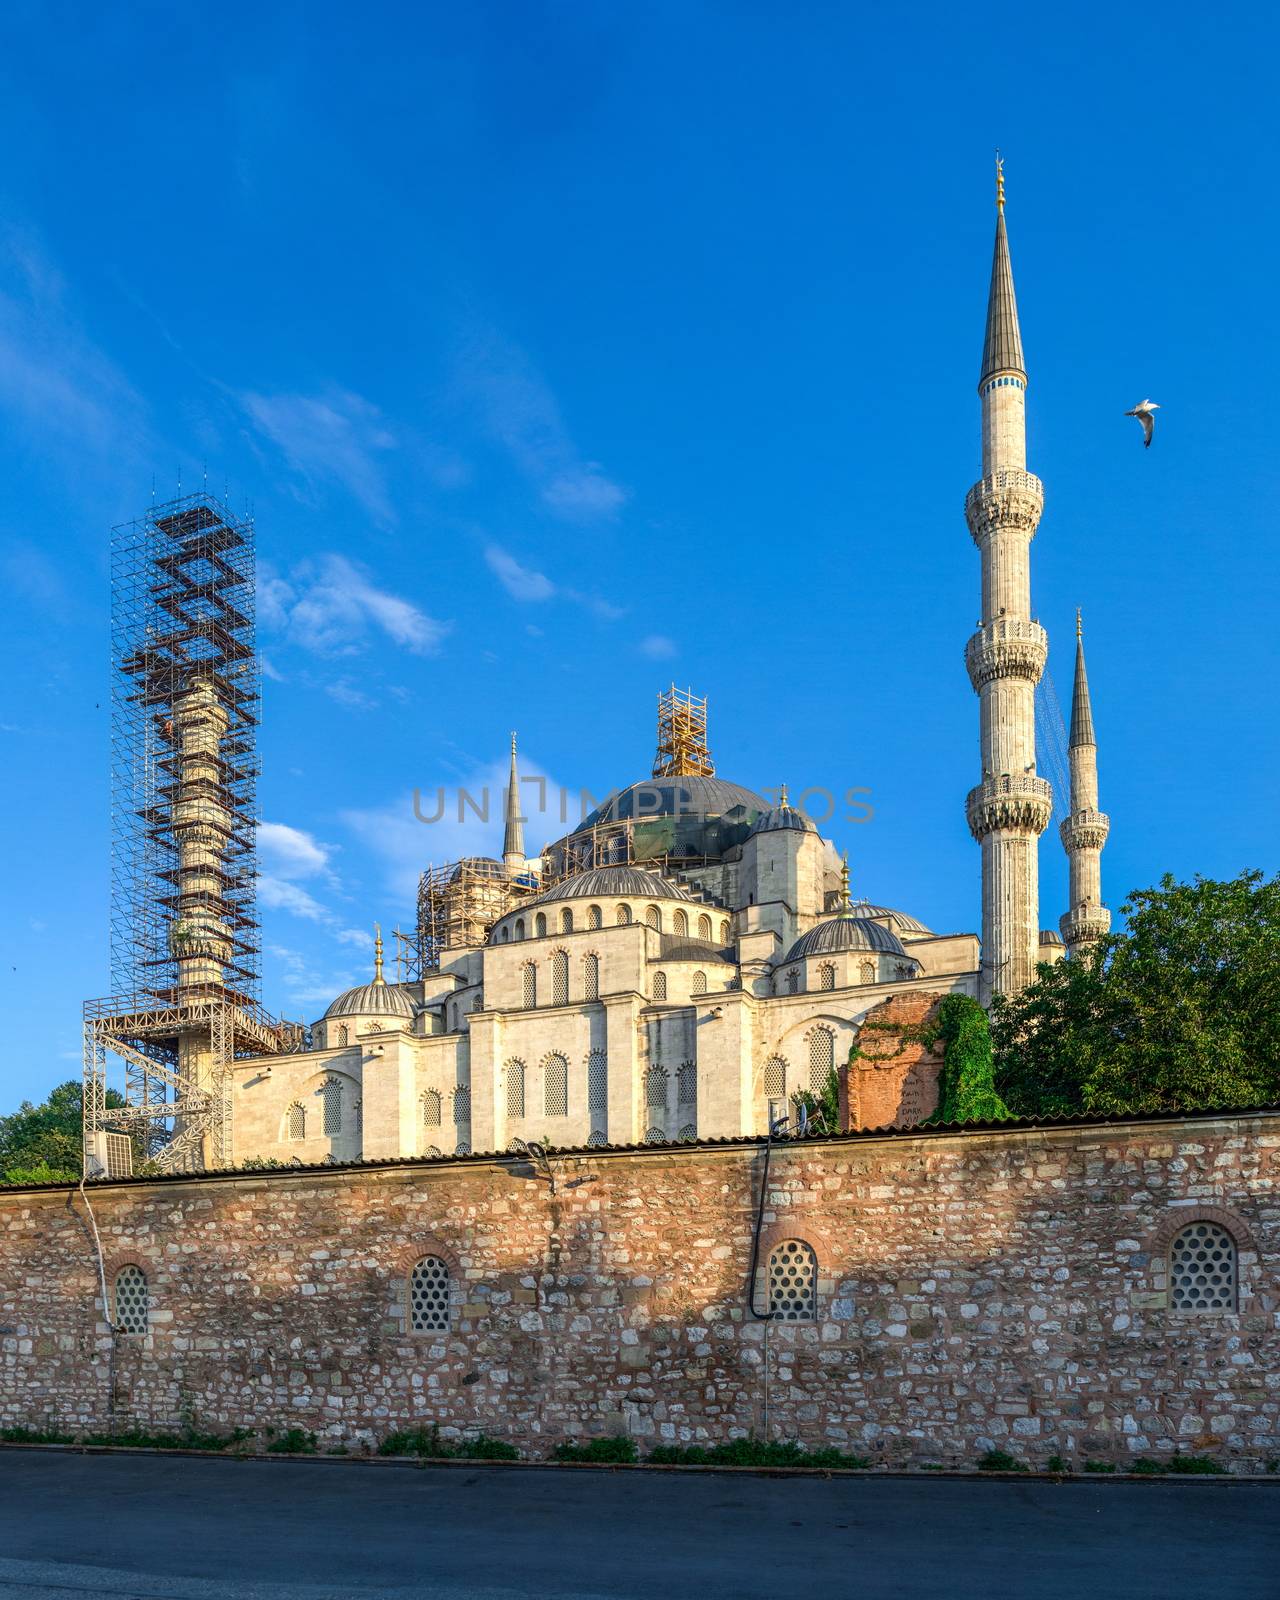 Blue Mosque in Istanbul, Turkey by Multipedia